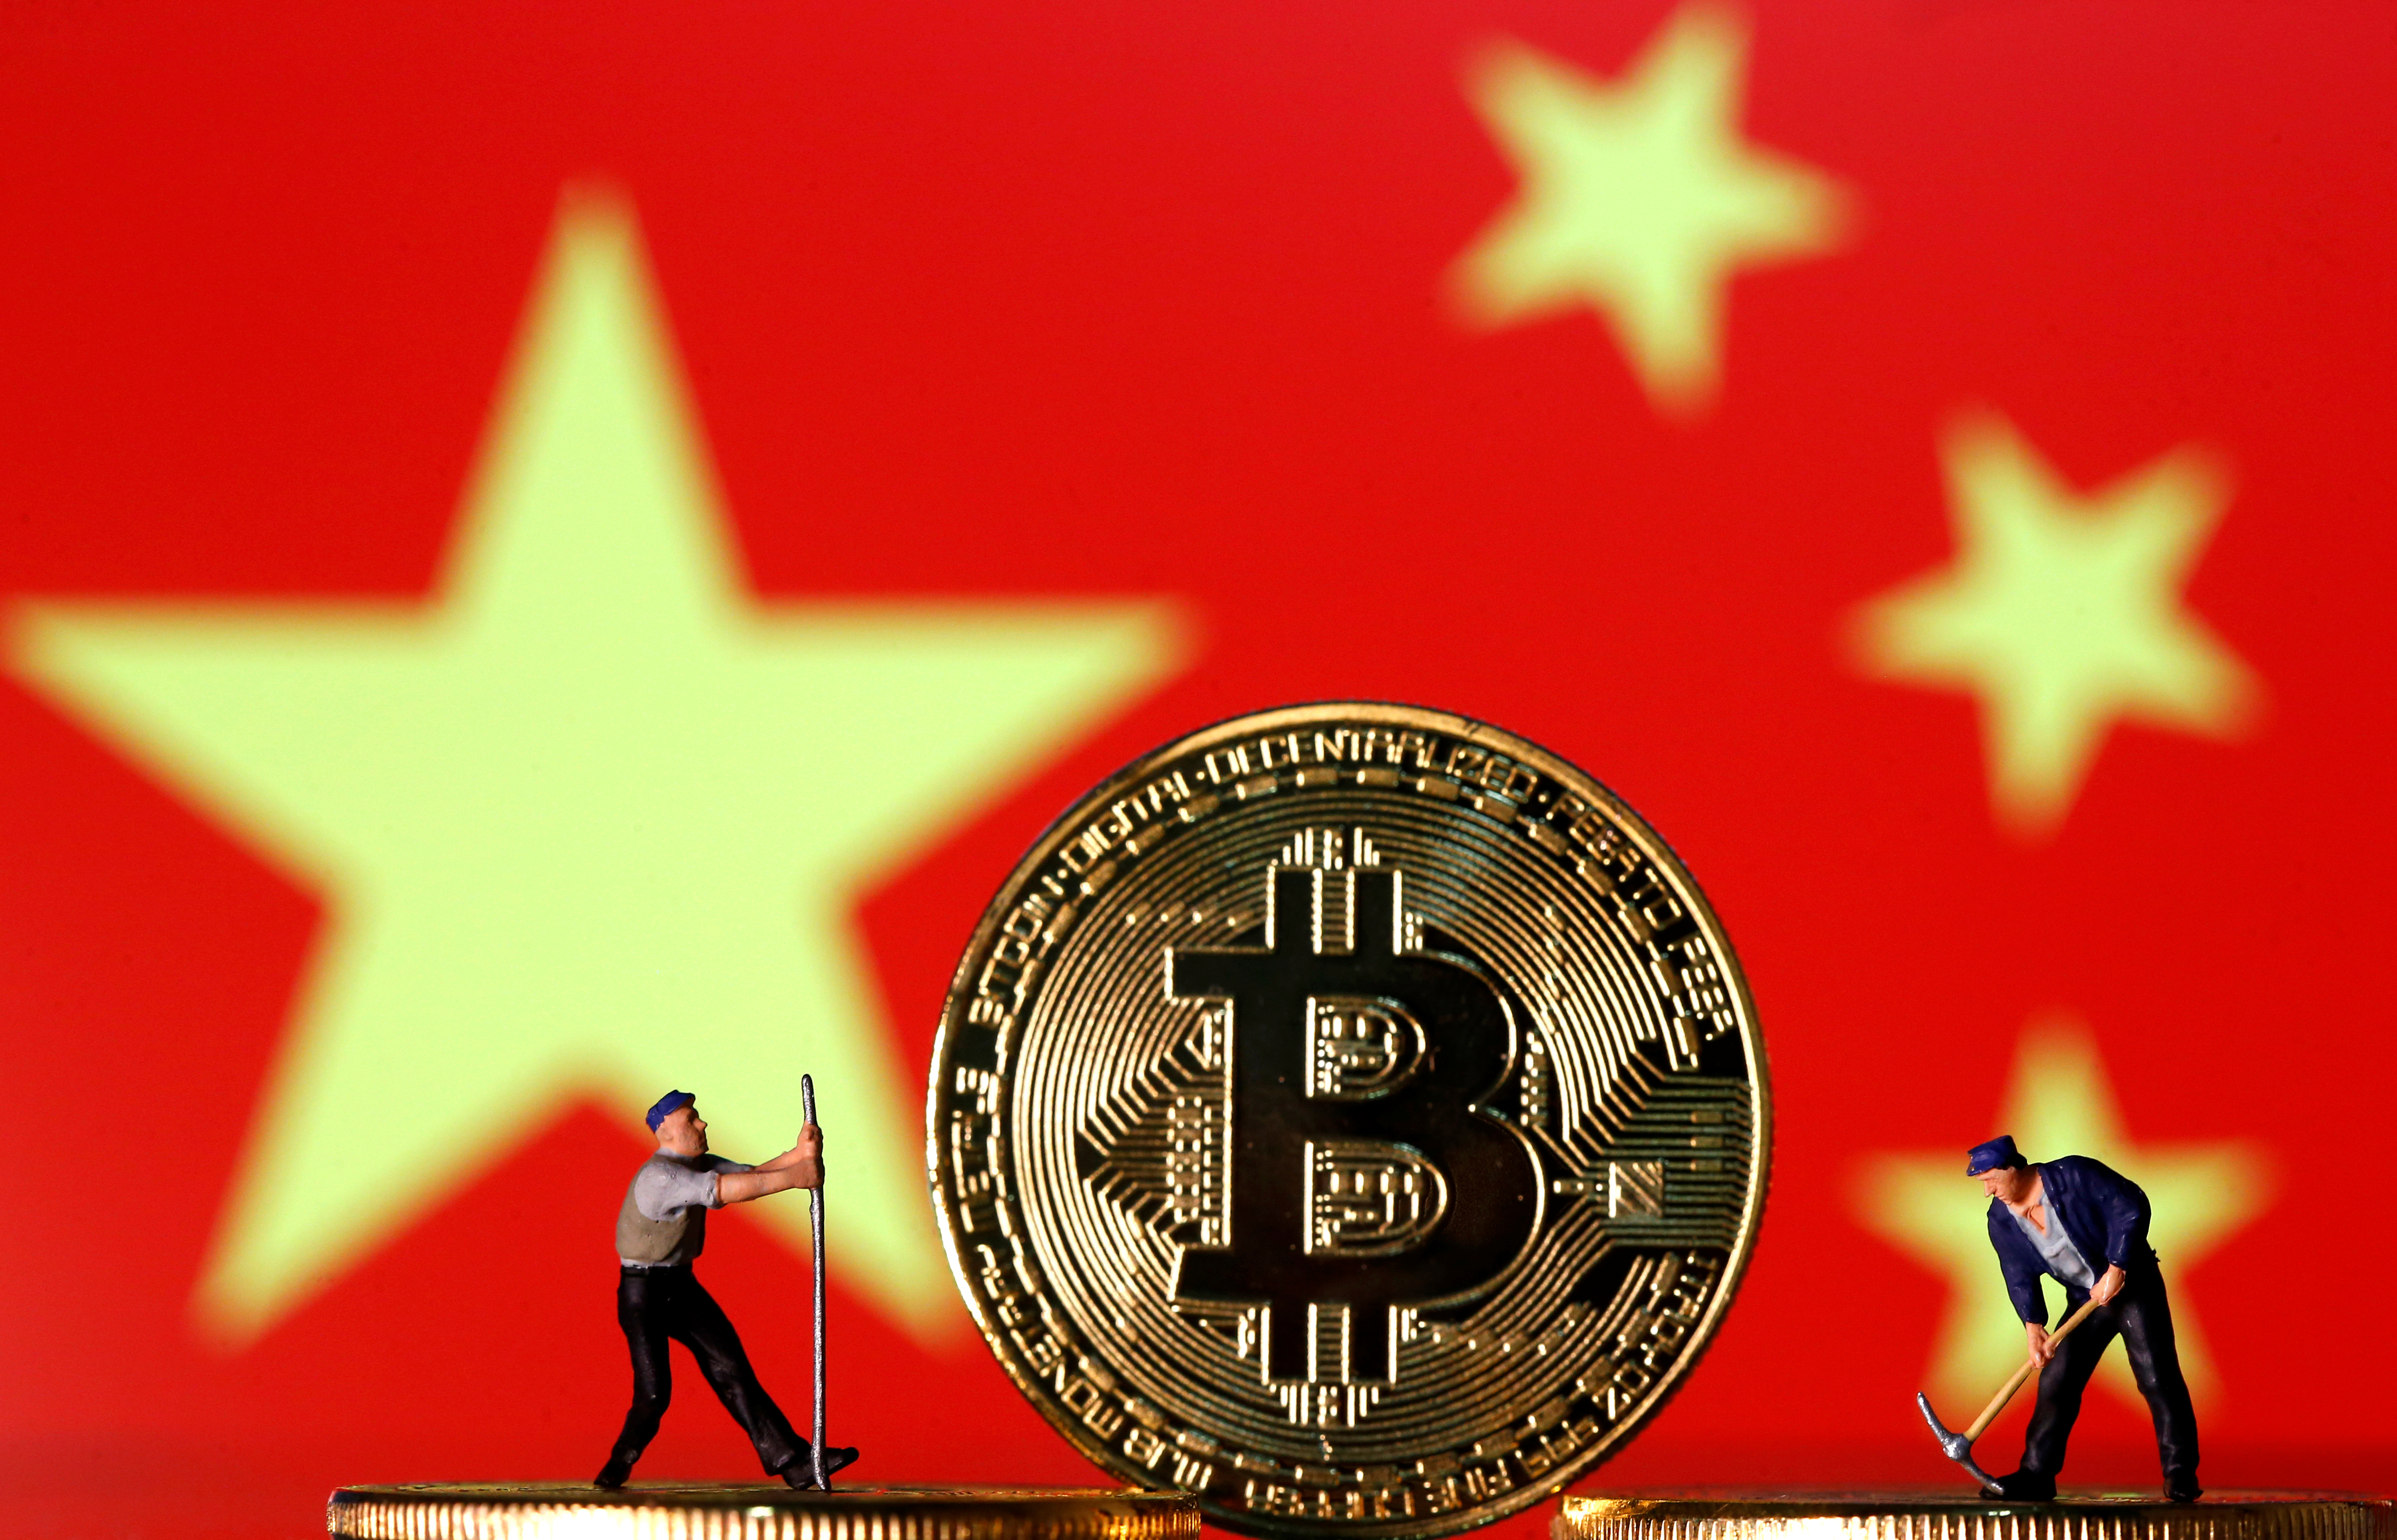 china vows to crack down on bitcoin mining, trading activities | reuters